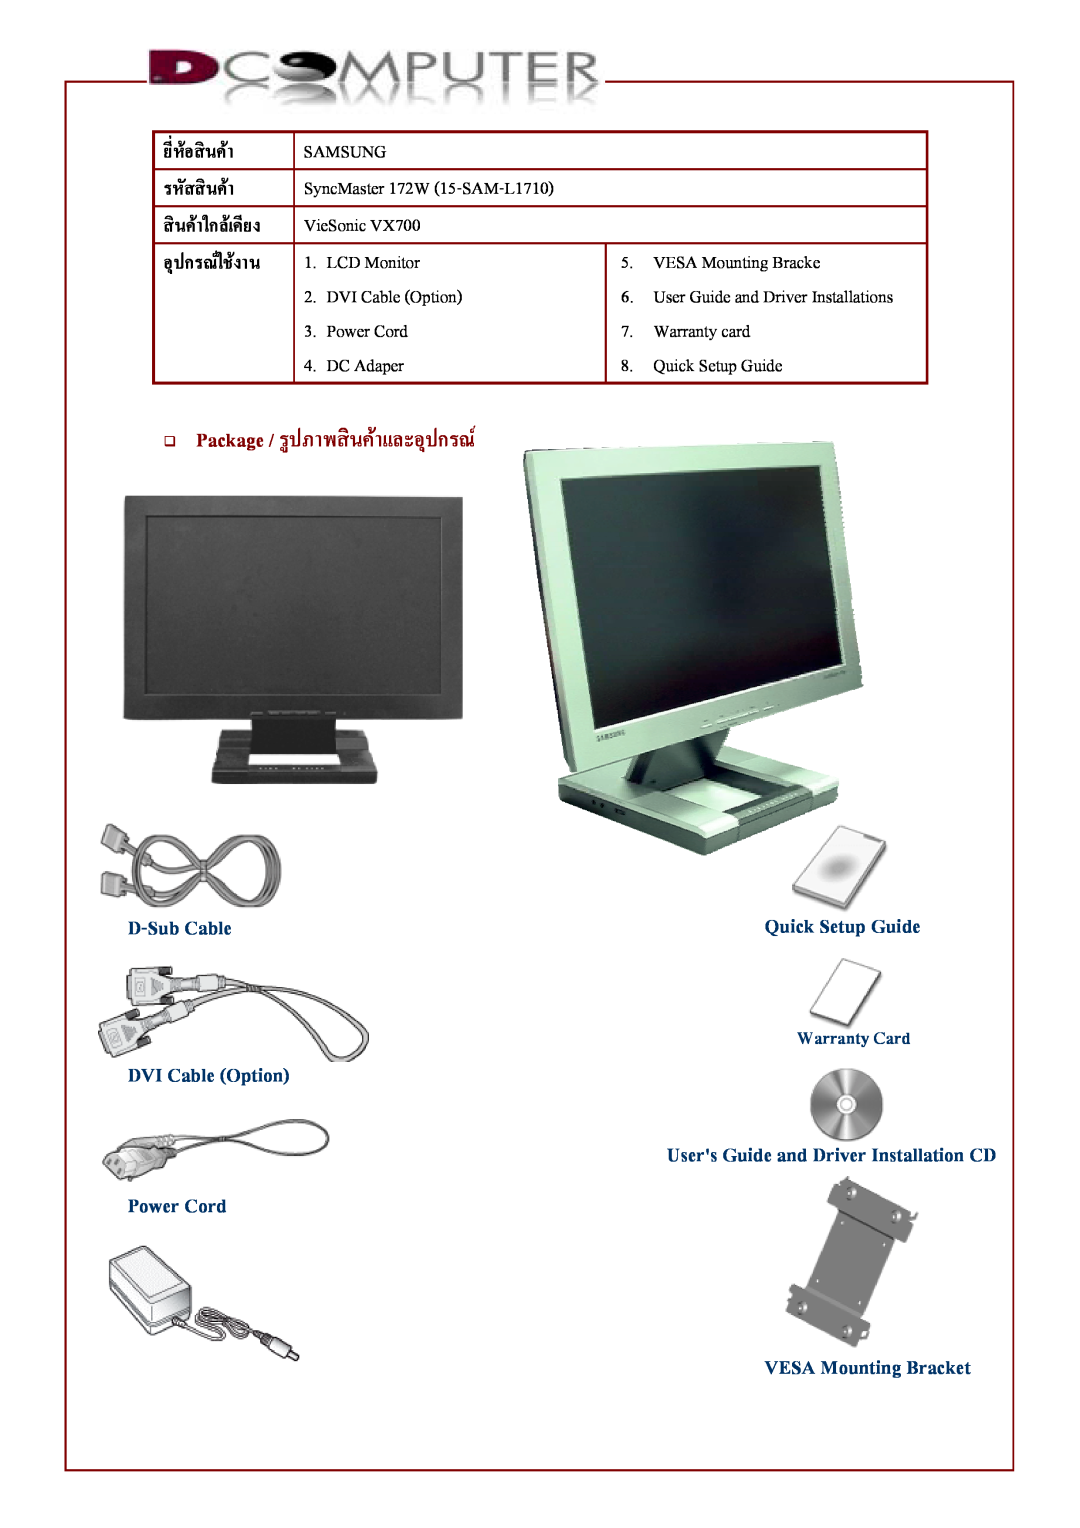 Samsung W setup guide Package / รูปภาพสินคาและอุปกรณ, D-Sub Cable, DC-Adapter, VESA Mounting Bracket, Quick Setup Guide 